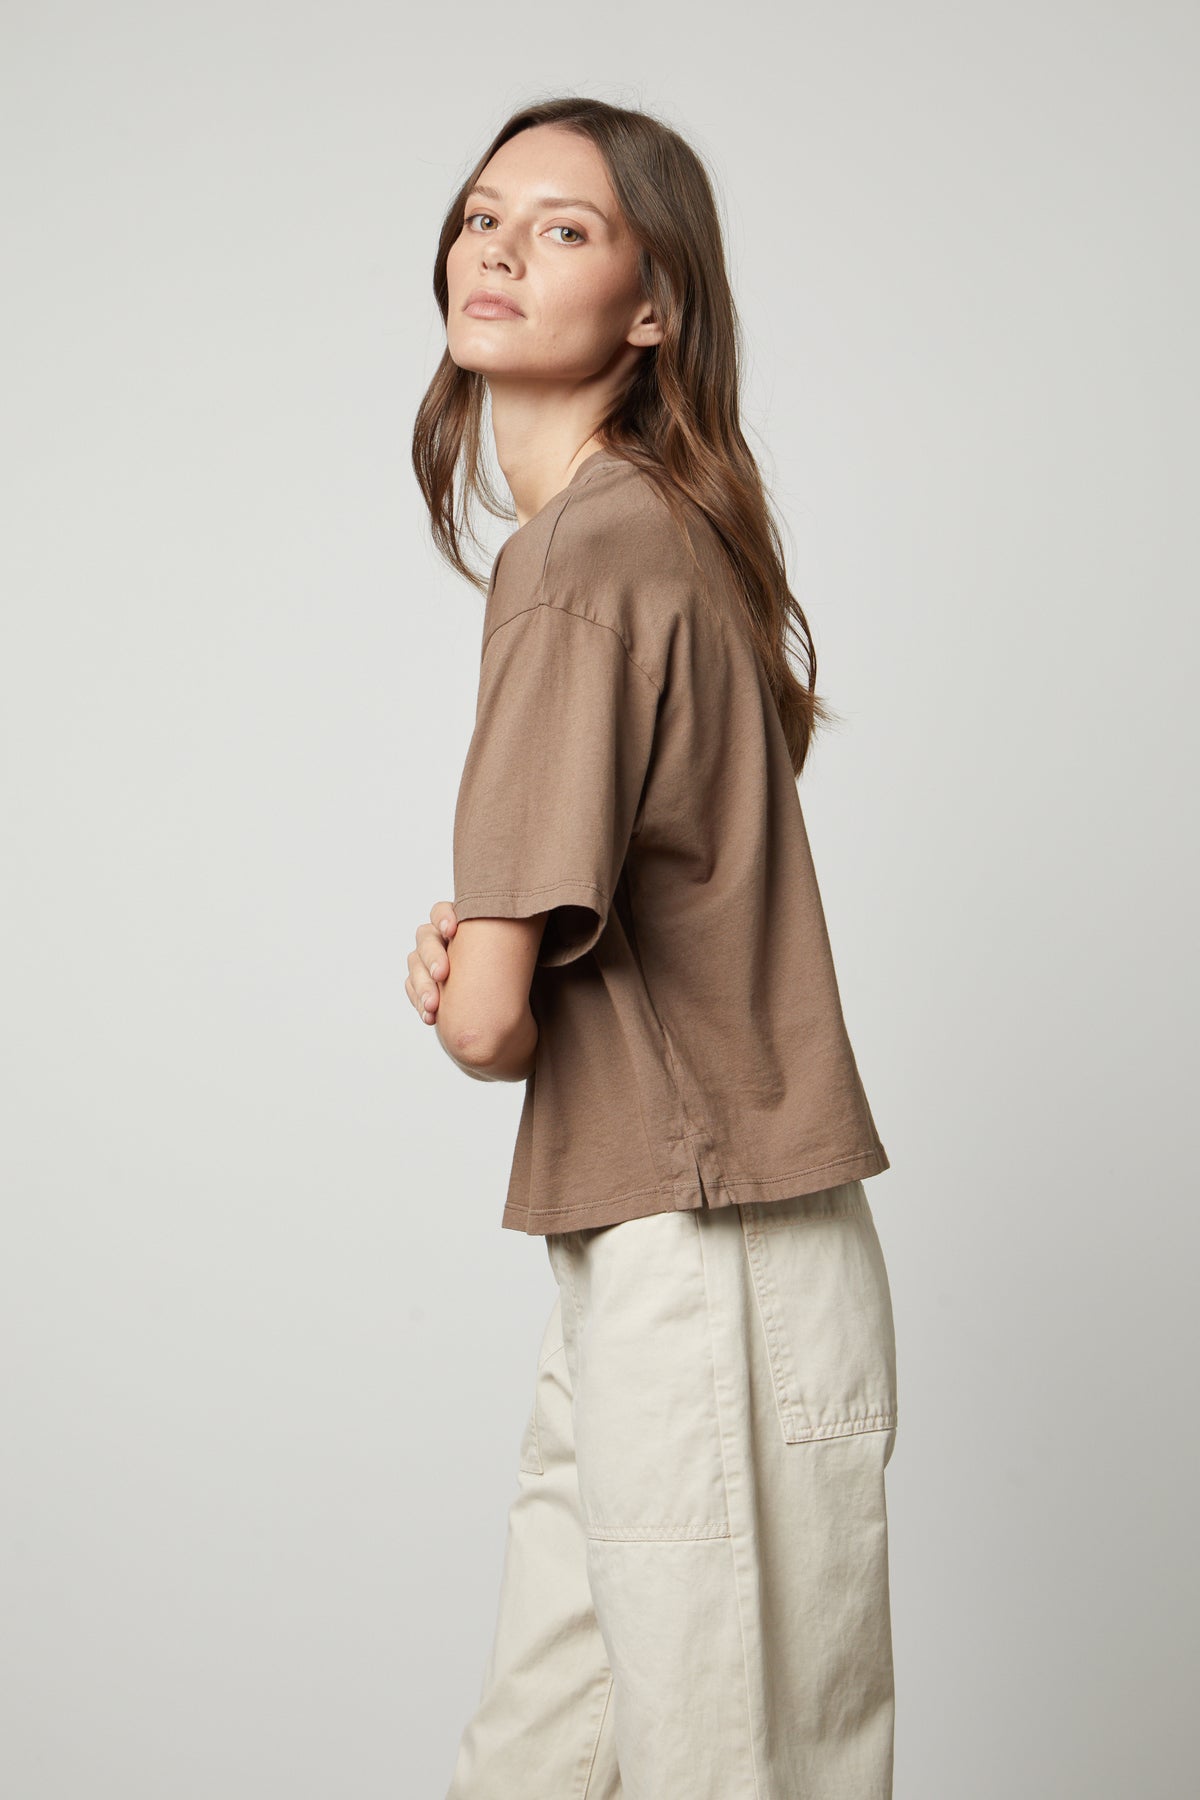 The model is wearing a brown CLARAH CREW NECK TEE by Velvet by Graham & Spencer and white pants, showcasing the sueded jersey fabric.-35655921139905